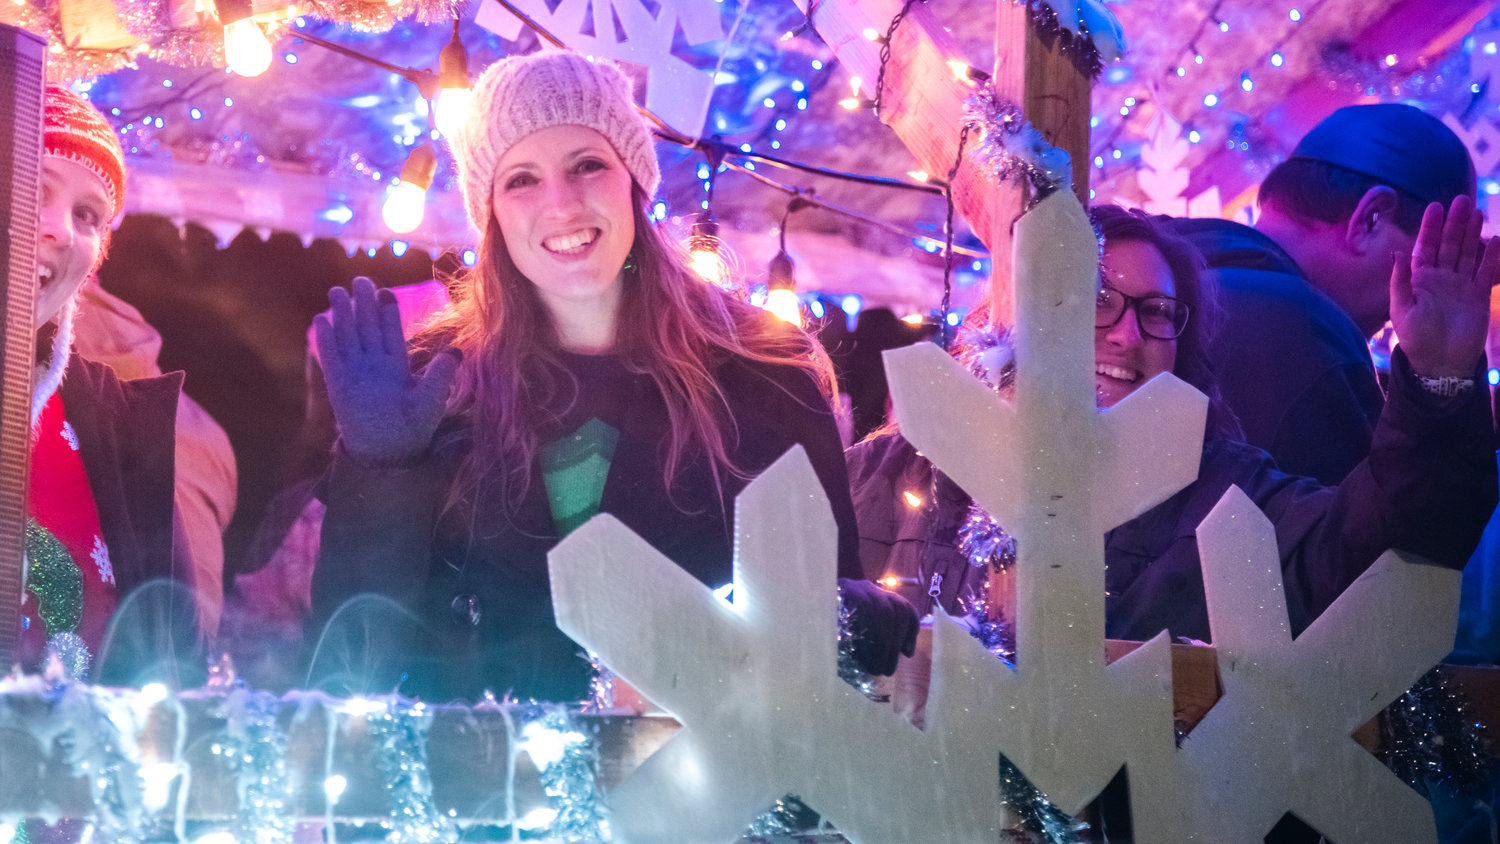 Community members smile and wave while surrounded by lights on a float Saturday night during the Lighted Tractor Parade in Centralia.